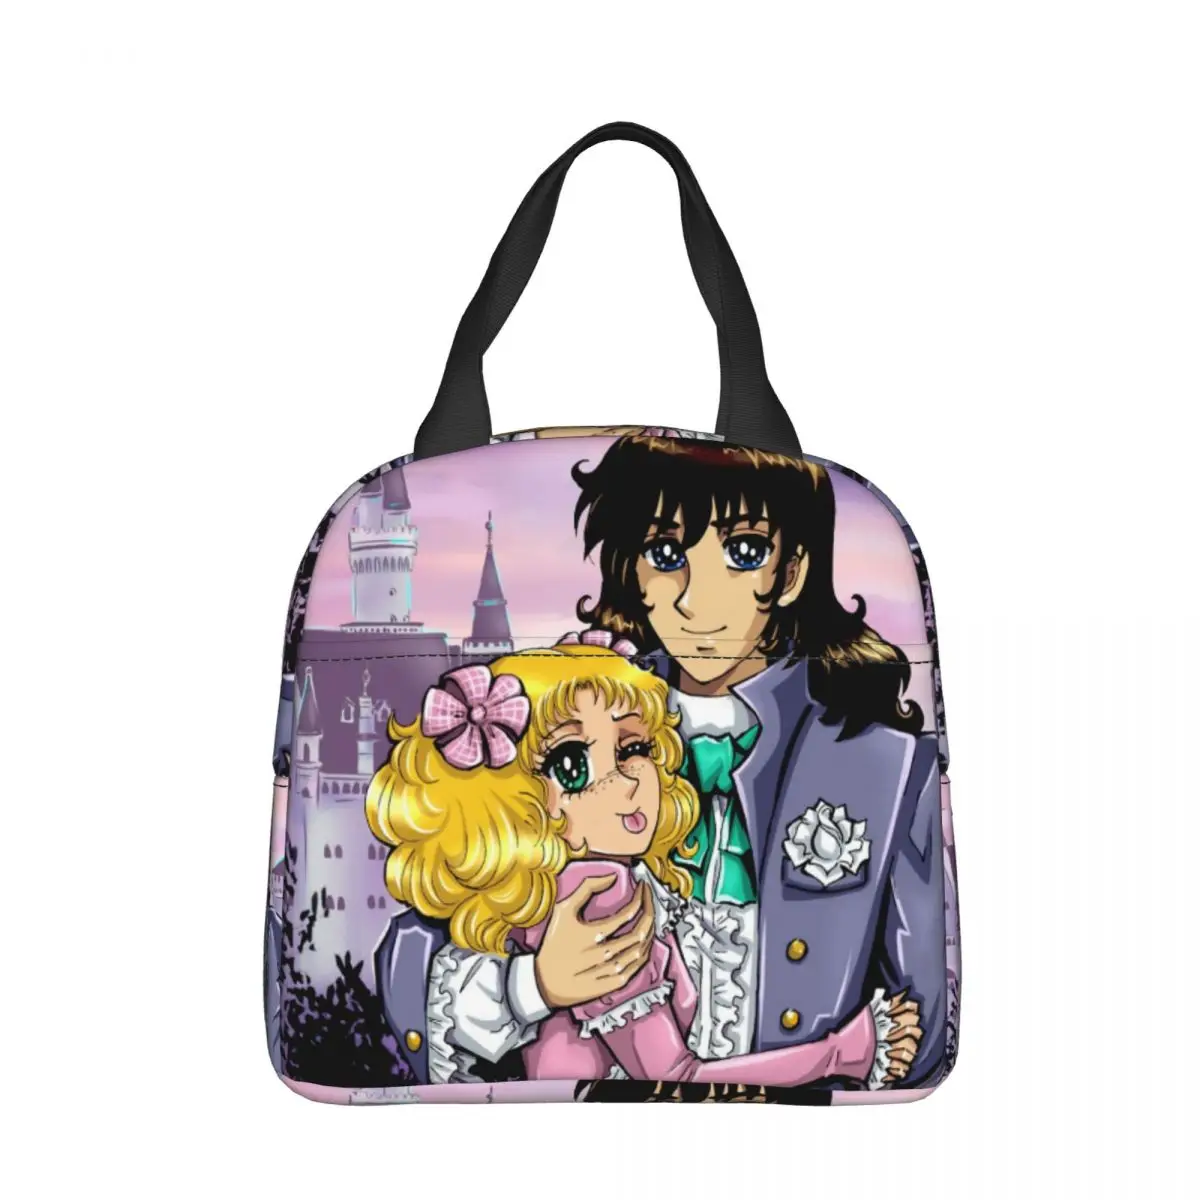 

Candy Candy And Terry Insulated Lunch Bag Cooler Bag Anime Manga Candice Japan Cartoon Large Tote Lunch Box Bento Pouch Work